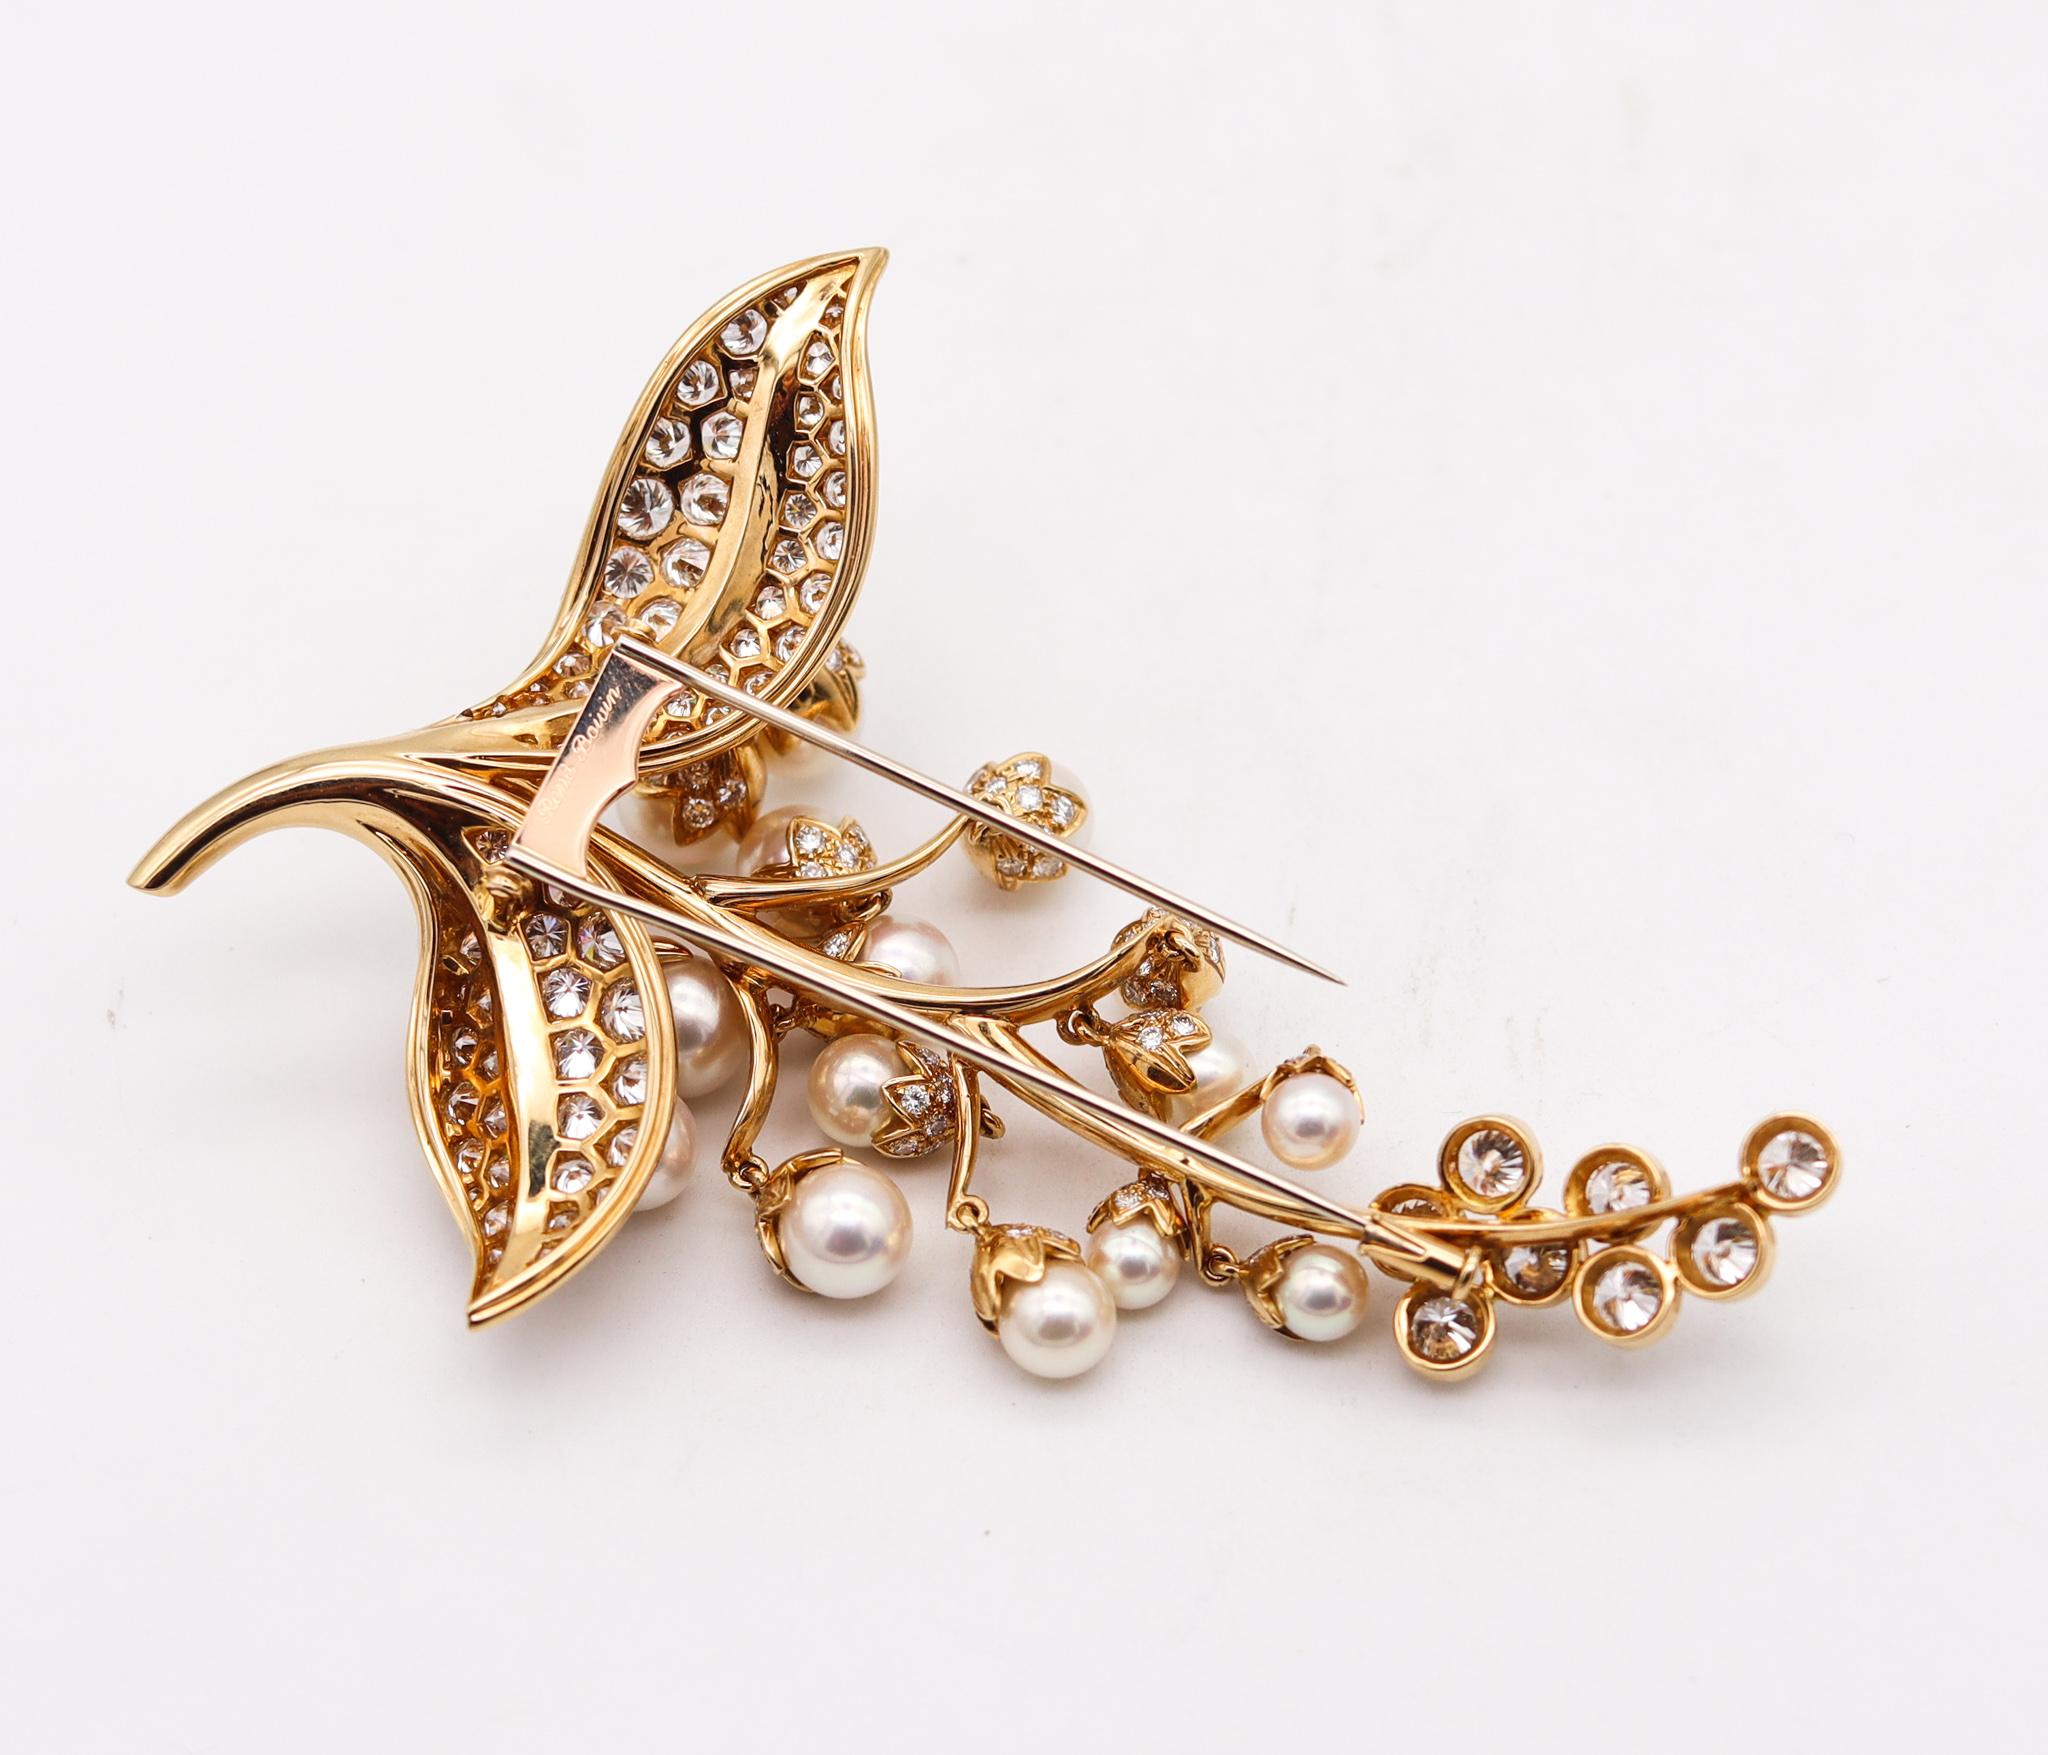 Modernist Rene Boivin Paris Gem Set Brooch 18kt Gold with 14.09ctw in Diamonds and Pearls For Sale